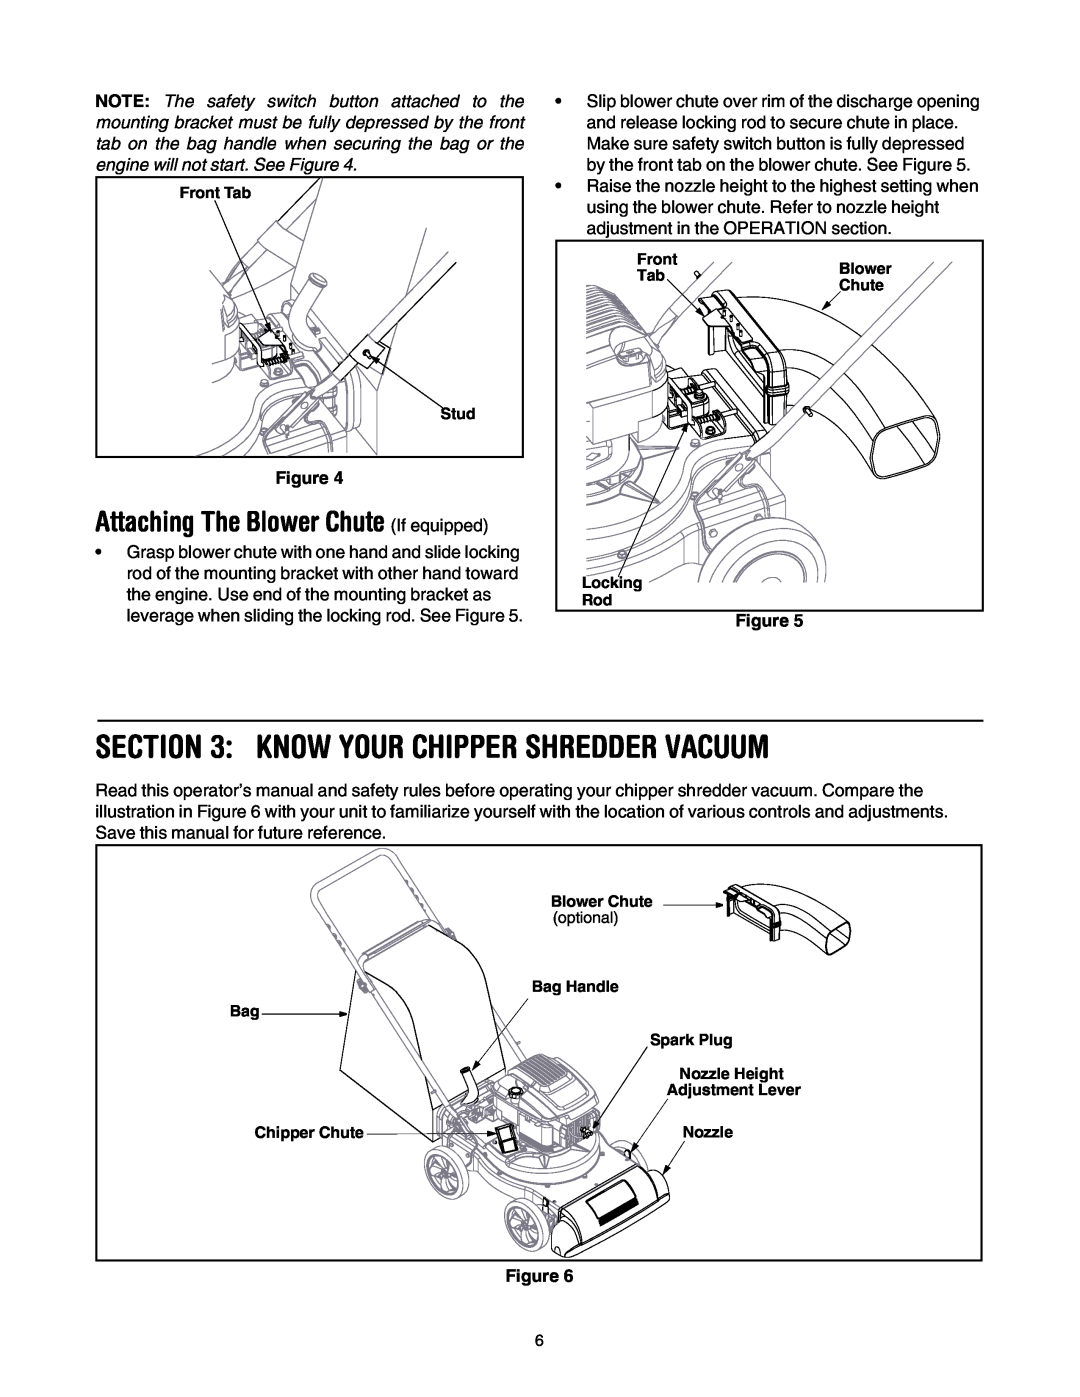 MTD 020 manual Know Your Chipper Shredder Vacuum, Attaching The Blower Chute If equipped 